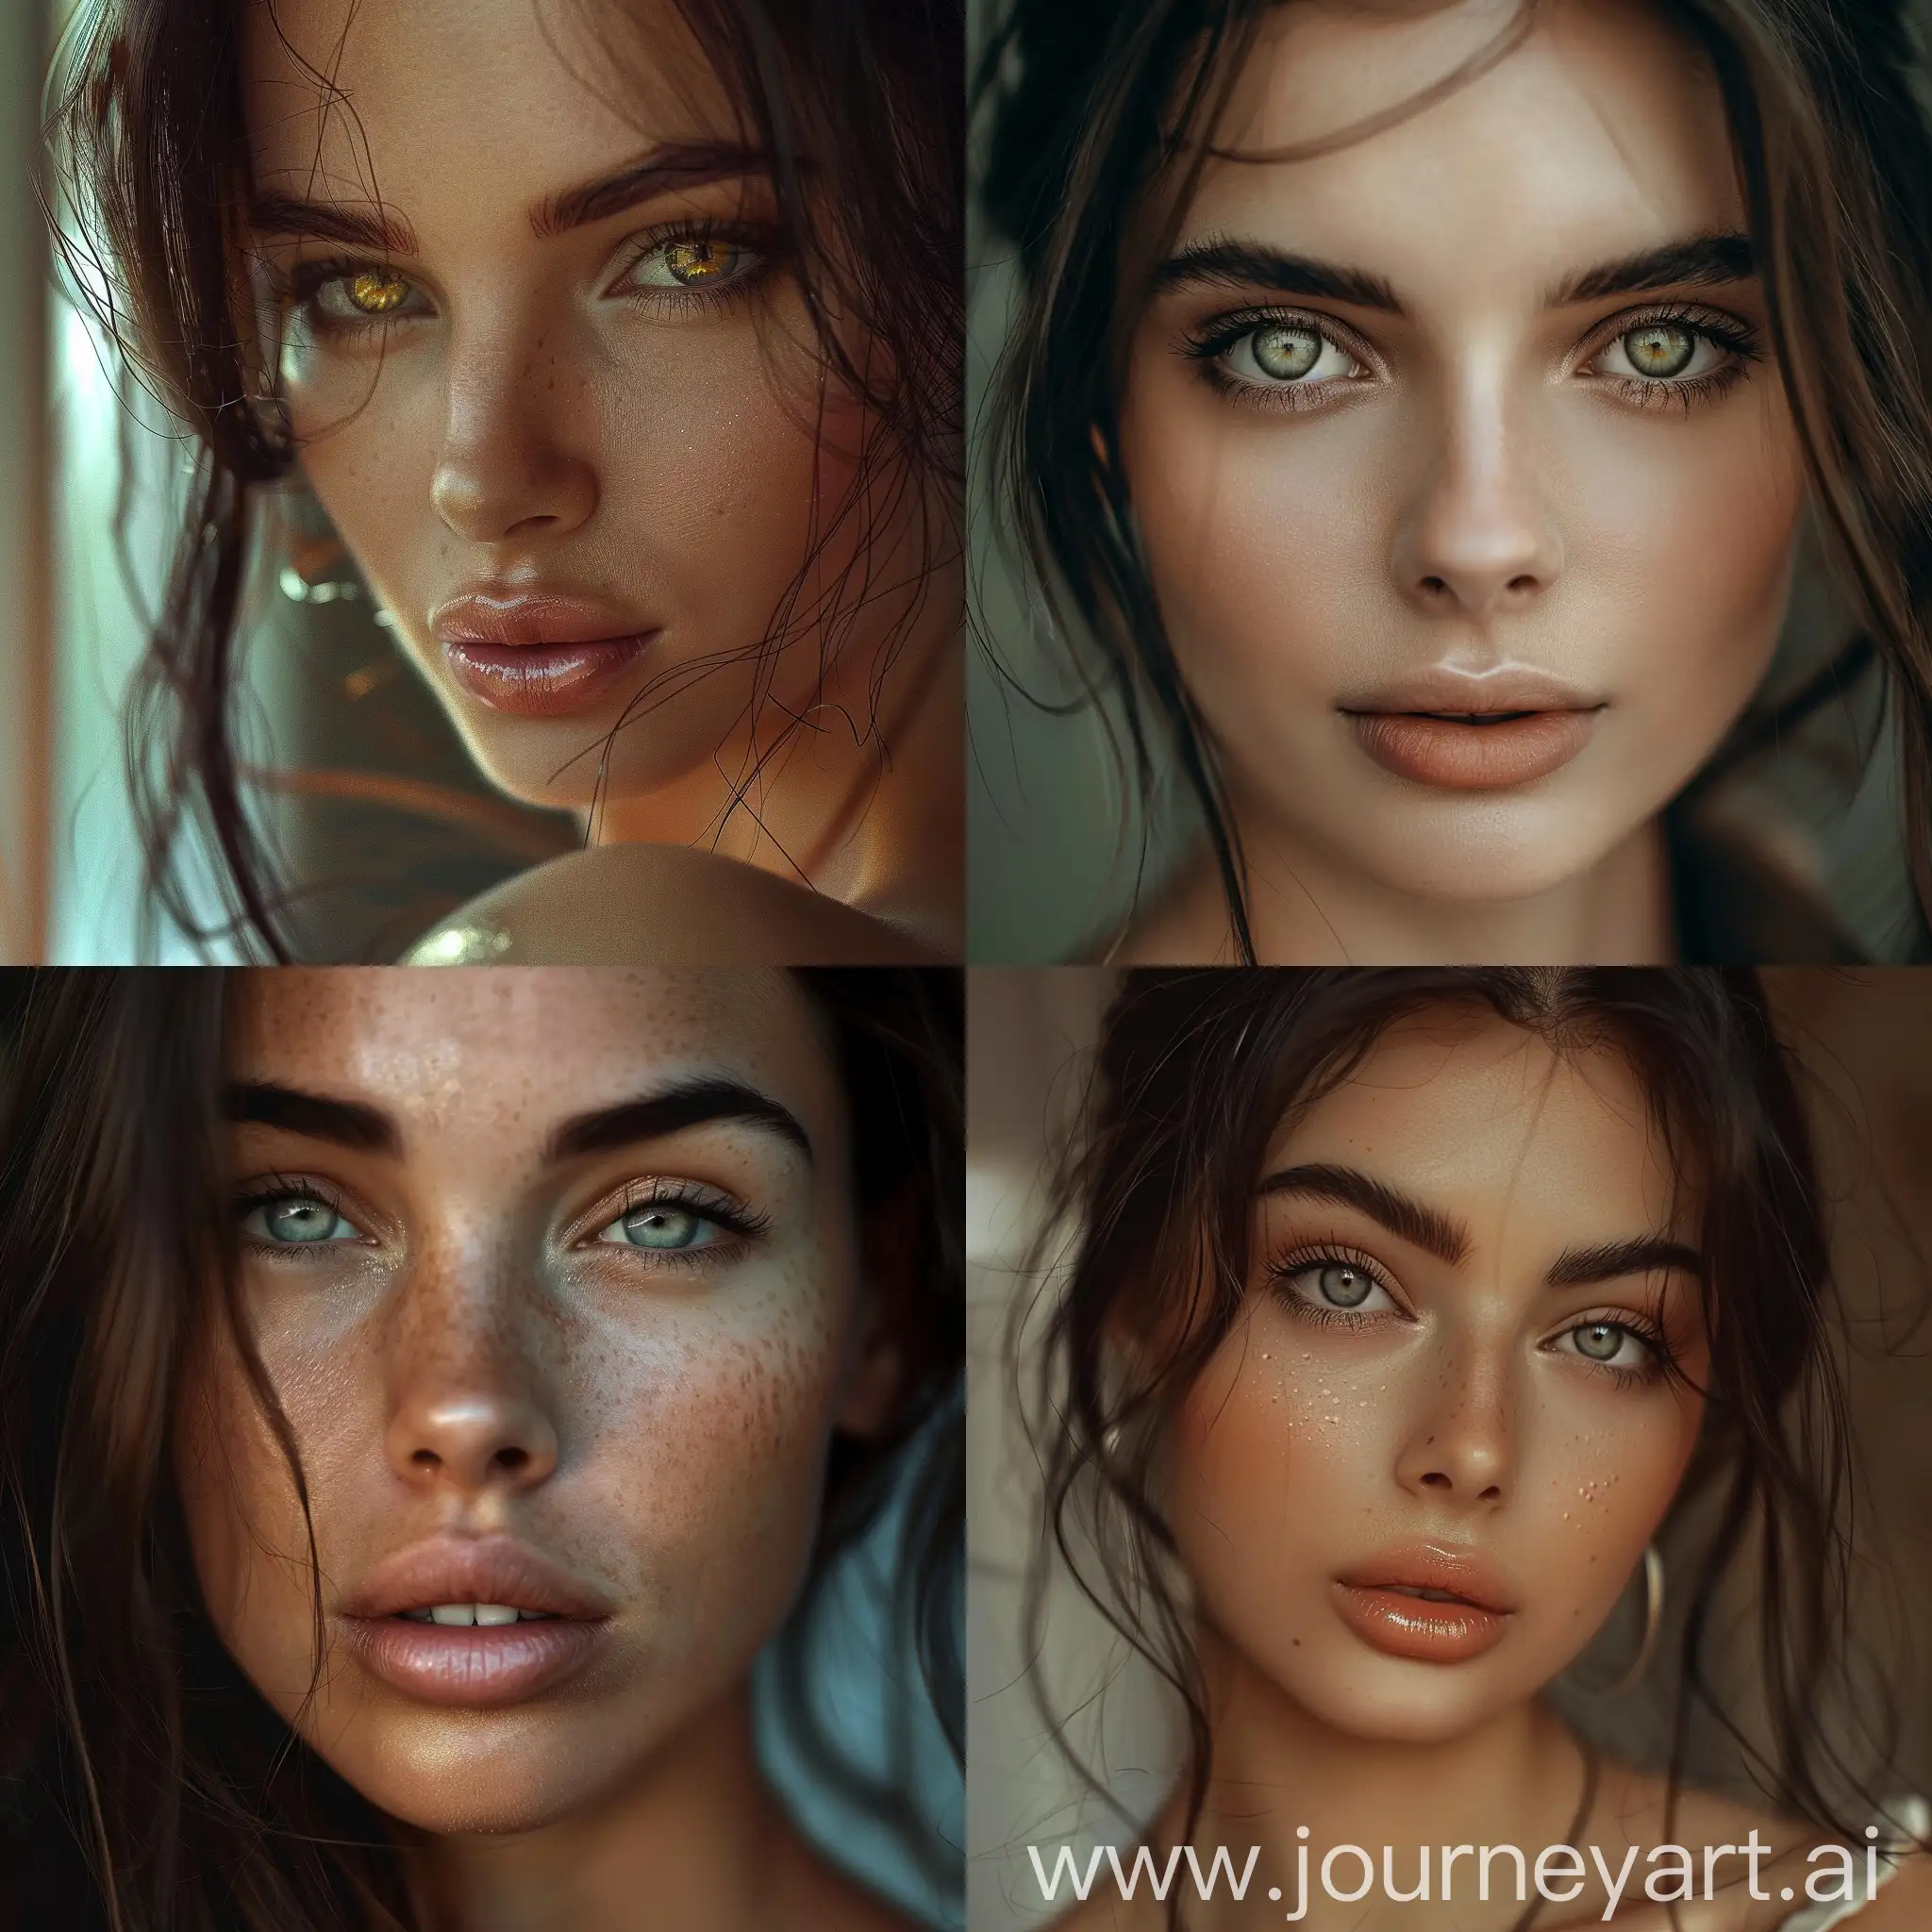 Portrait-of-an-Exquisitely-Beautiful-Woman-with-Perfect-Features-and-Mesmerizing-Eyes